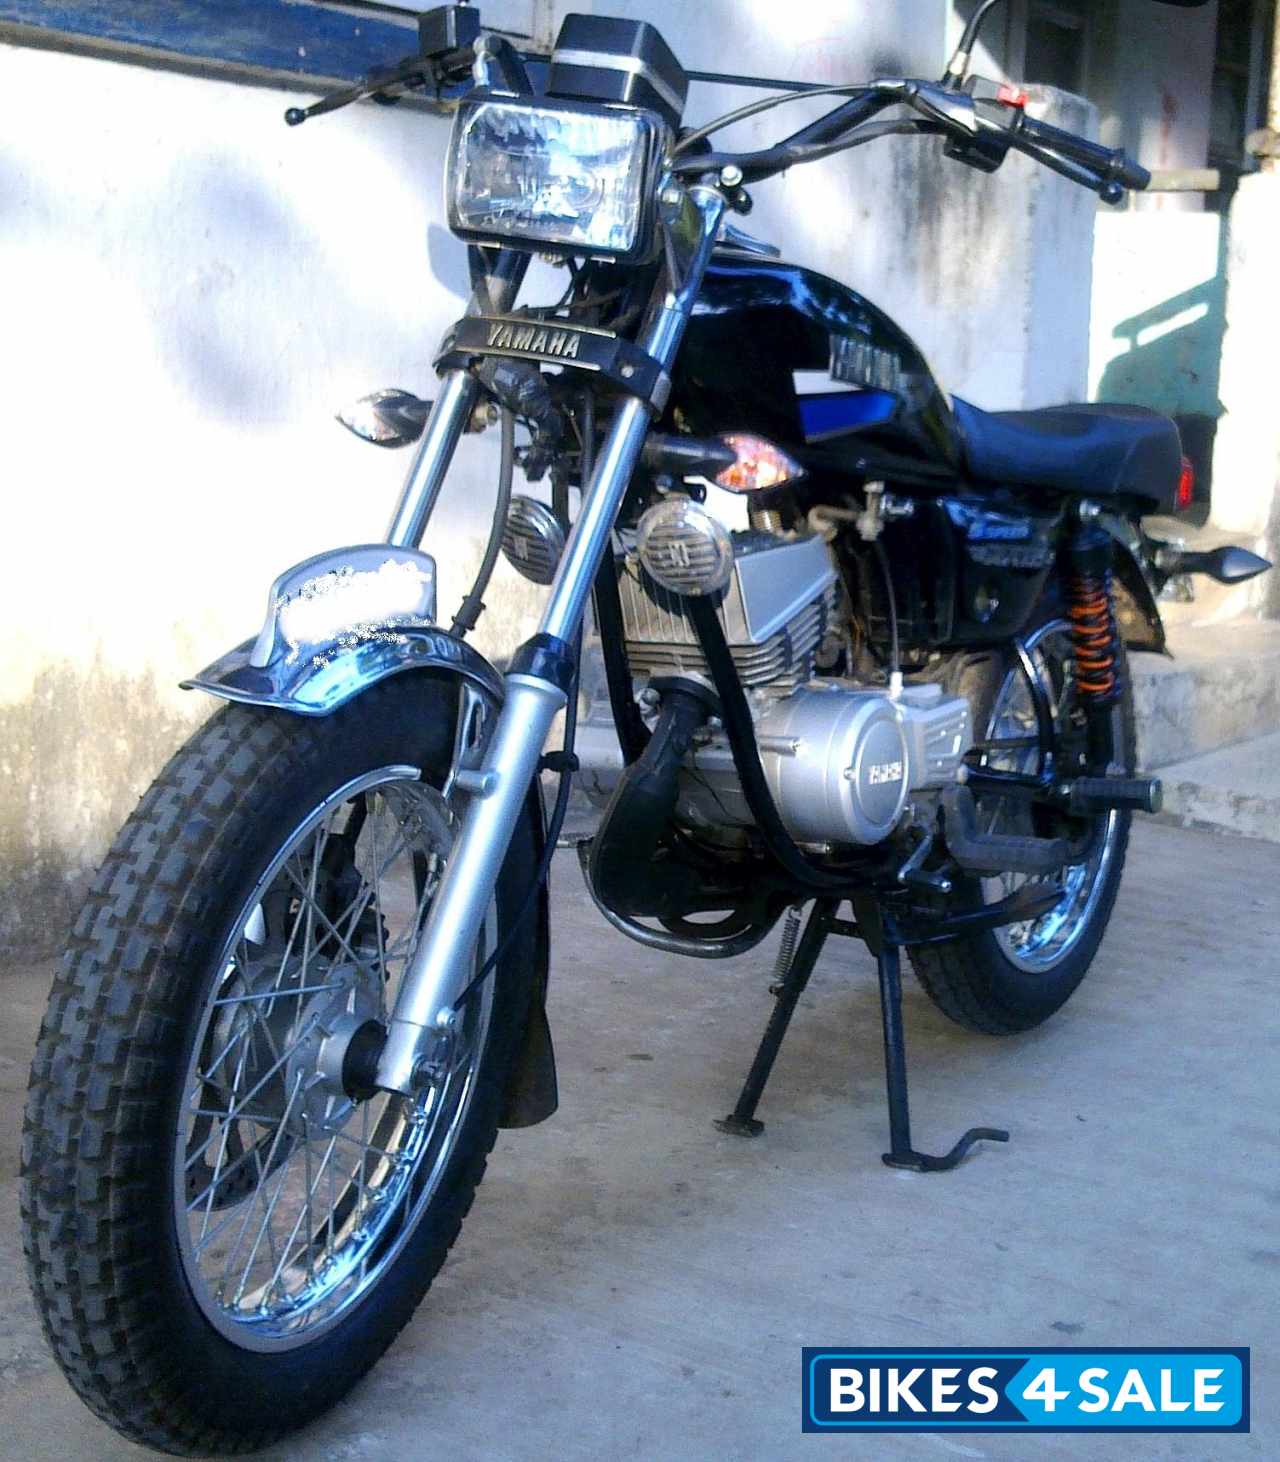 Used 2000 model Yamaha RX 135 for sale in Ernakulam. ID ...